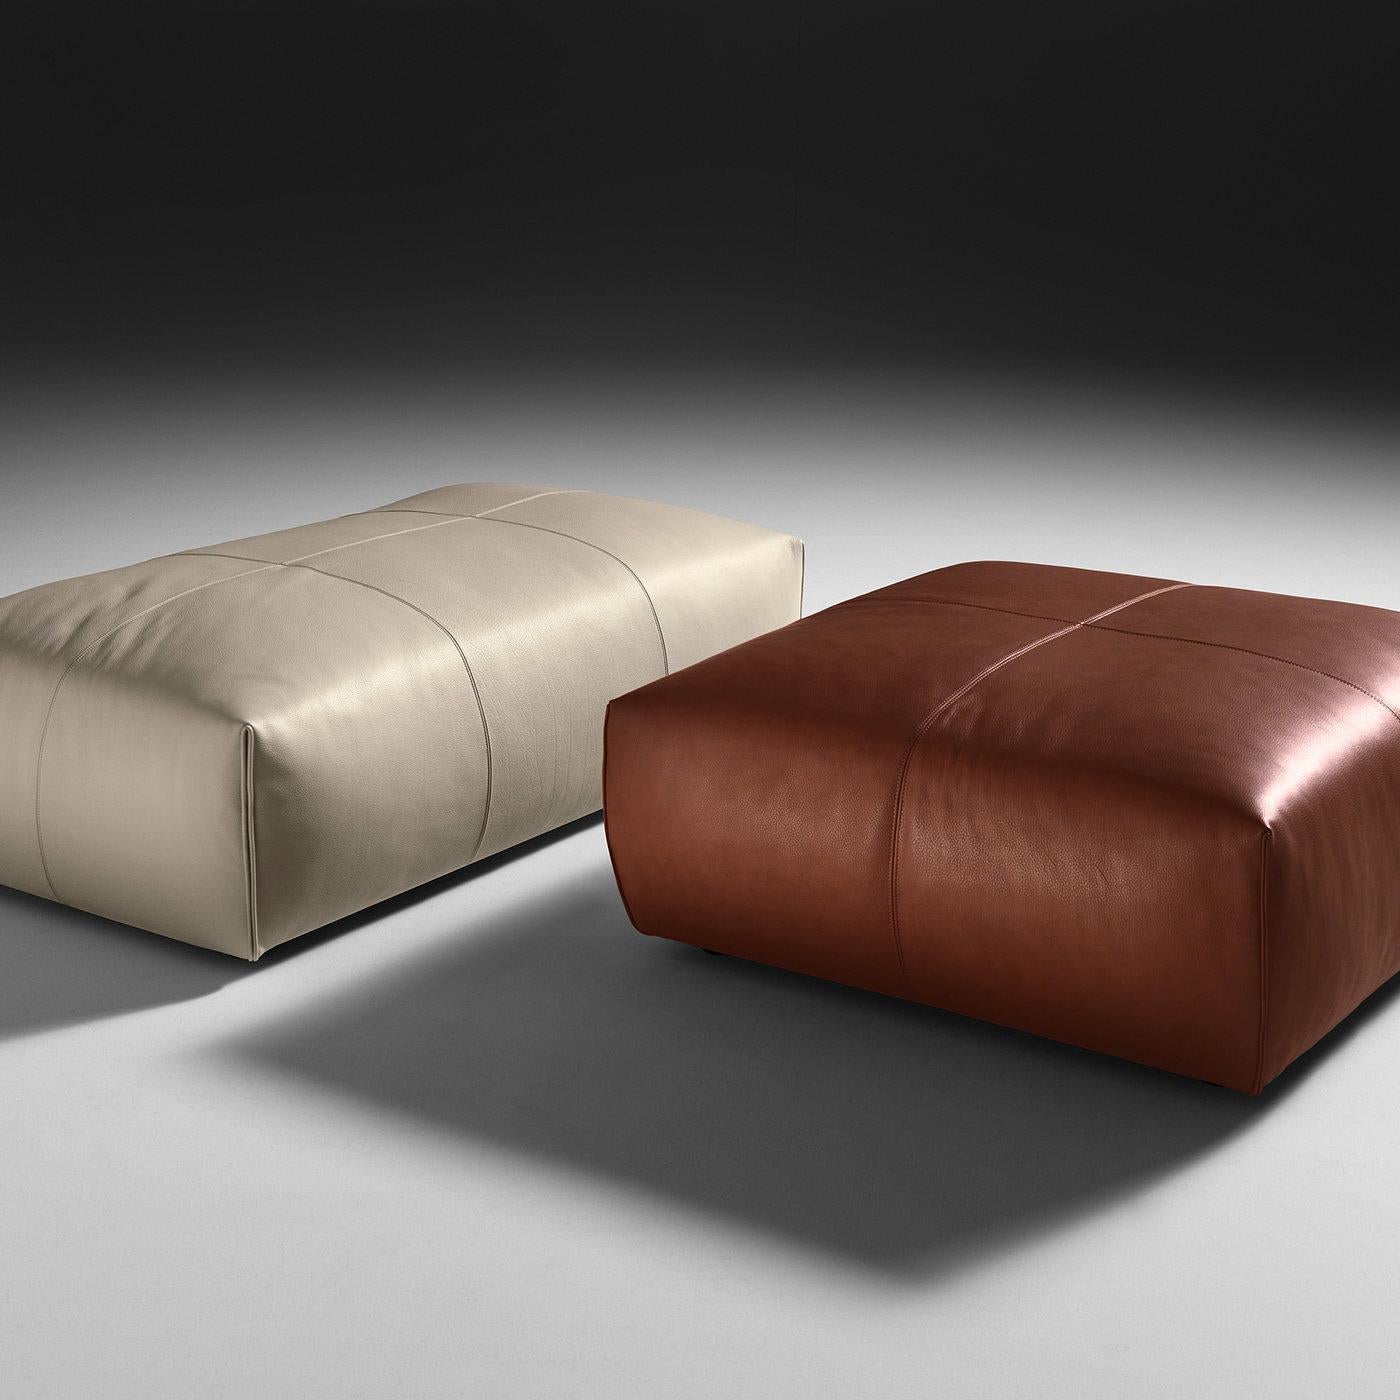 A refined addition to a modern or classic interior, this set of two poufs is a sophisticated piece of functional decor. The two pieces are made of leather and feature different hues and shapes: a square brown one (100x100x45 cm), and a white